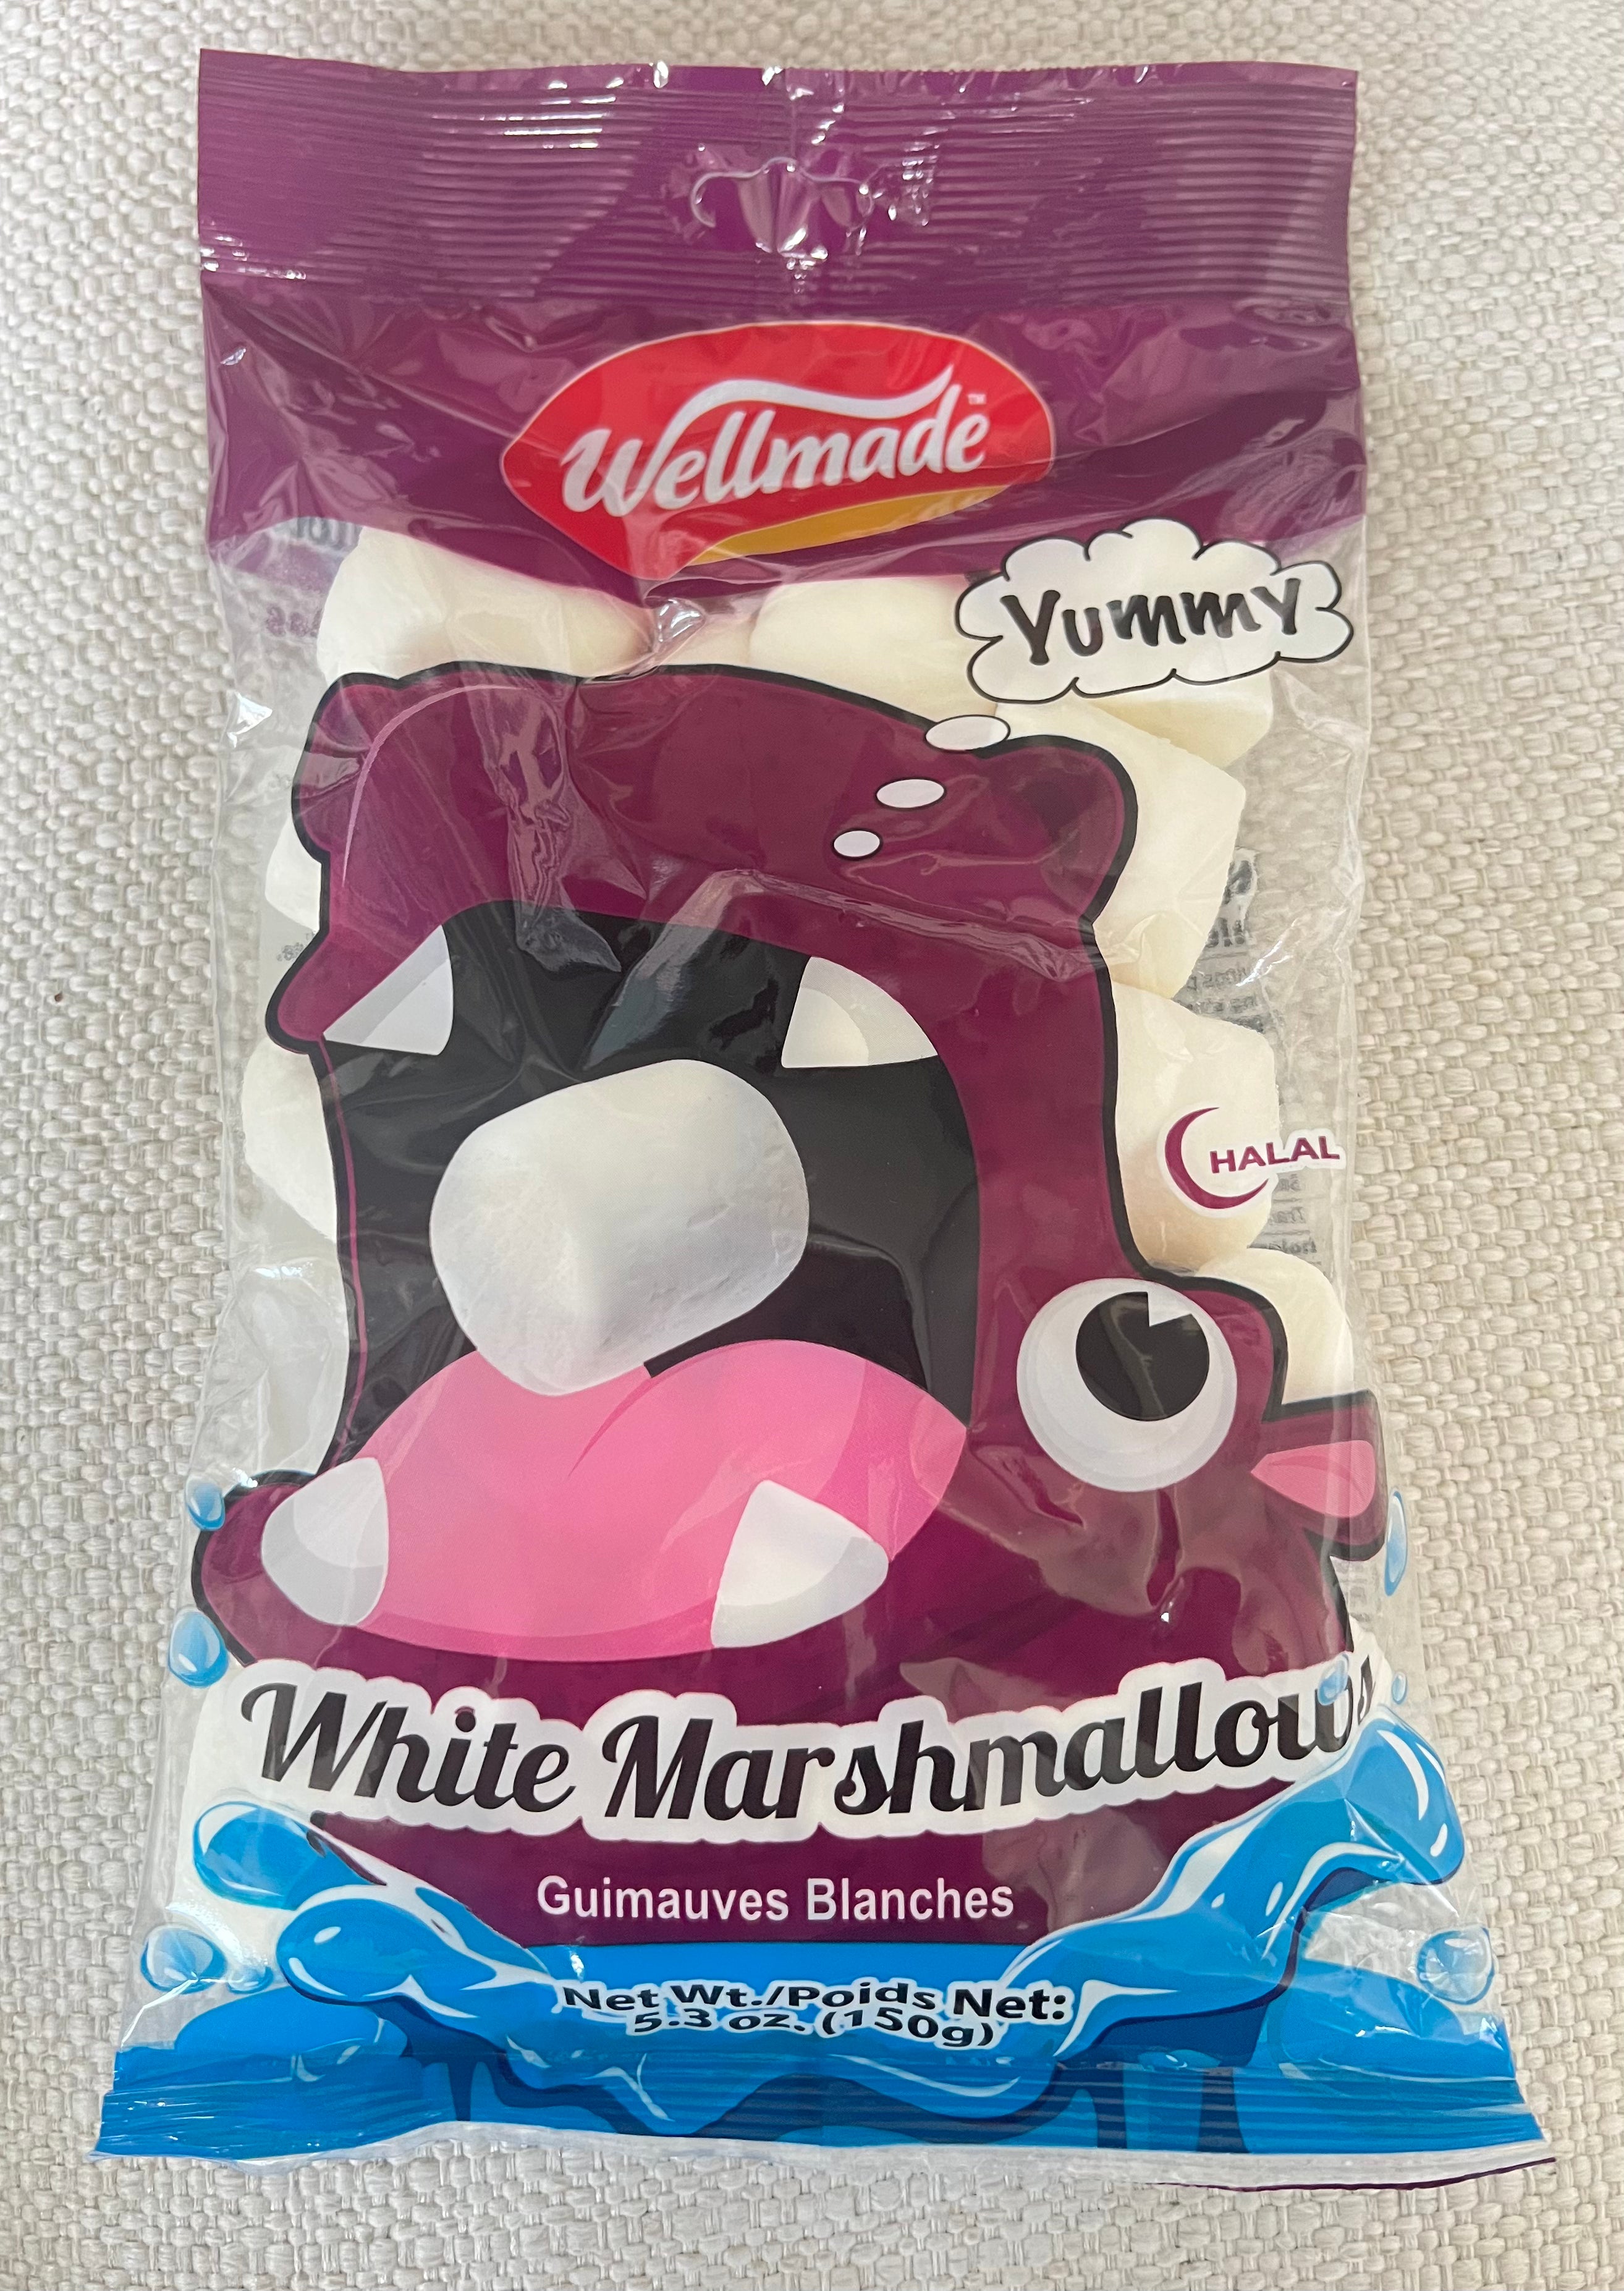 These marshmallows are halal approved : r/mildlyinfuriating